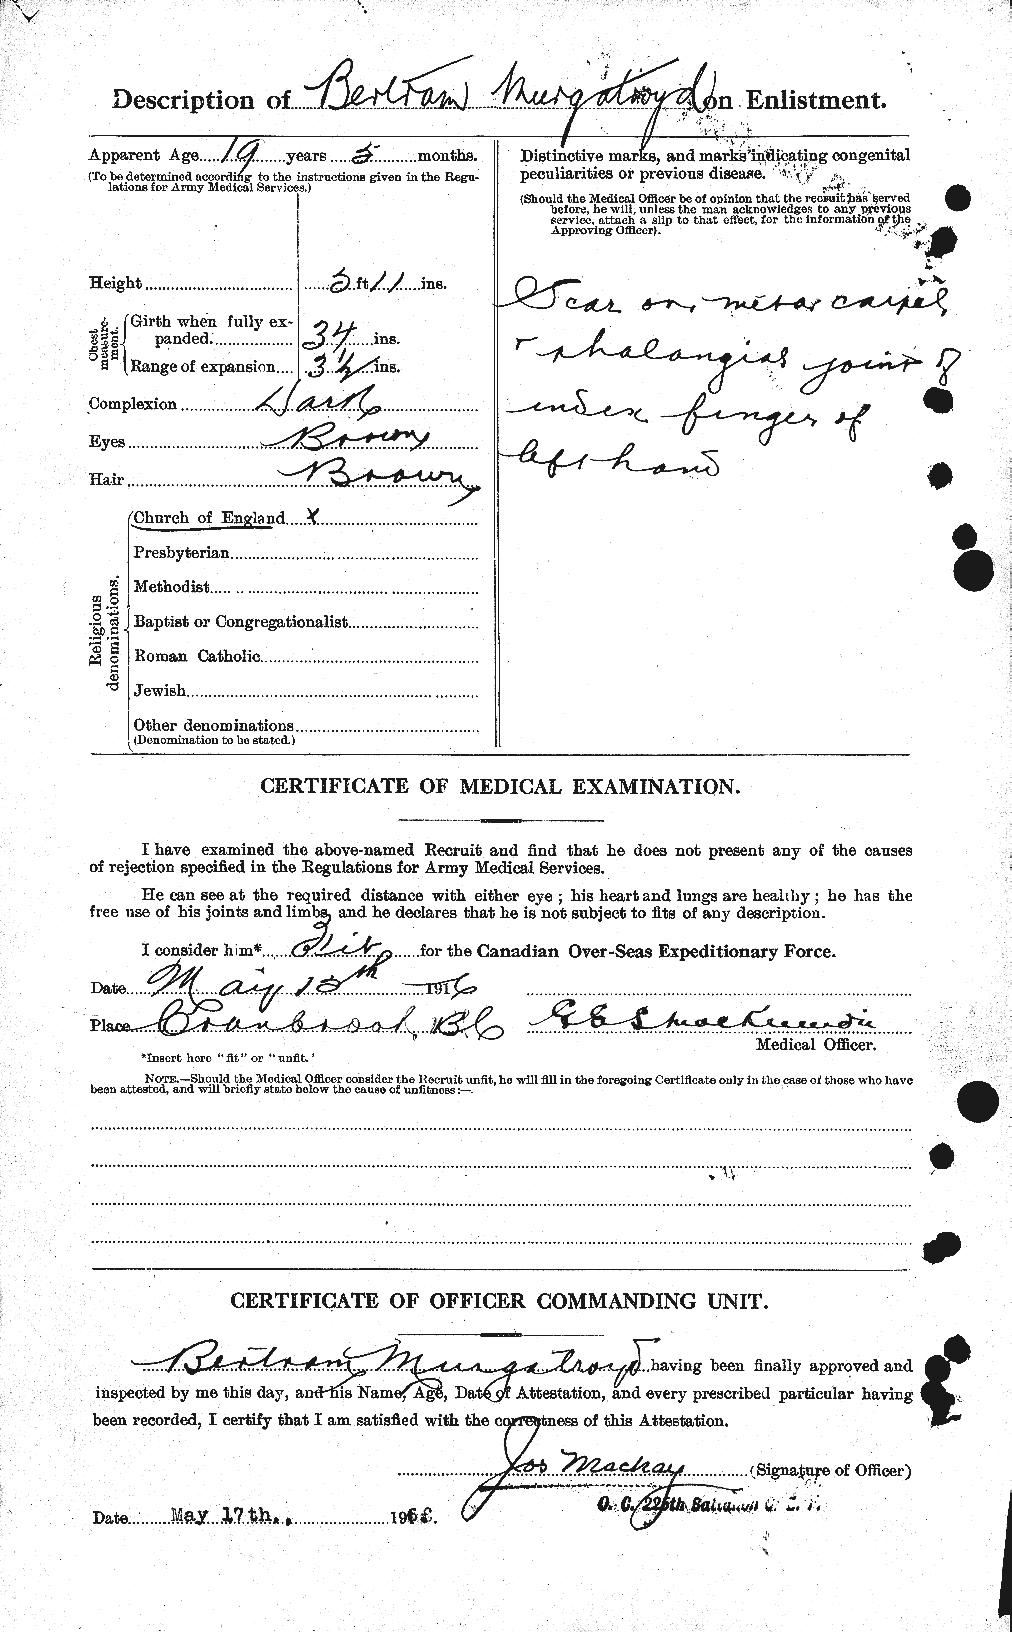 Personnel Records of the First World War - CEF 512573b